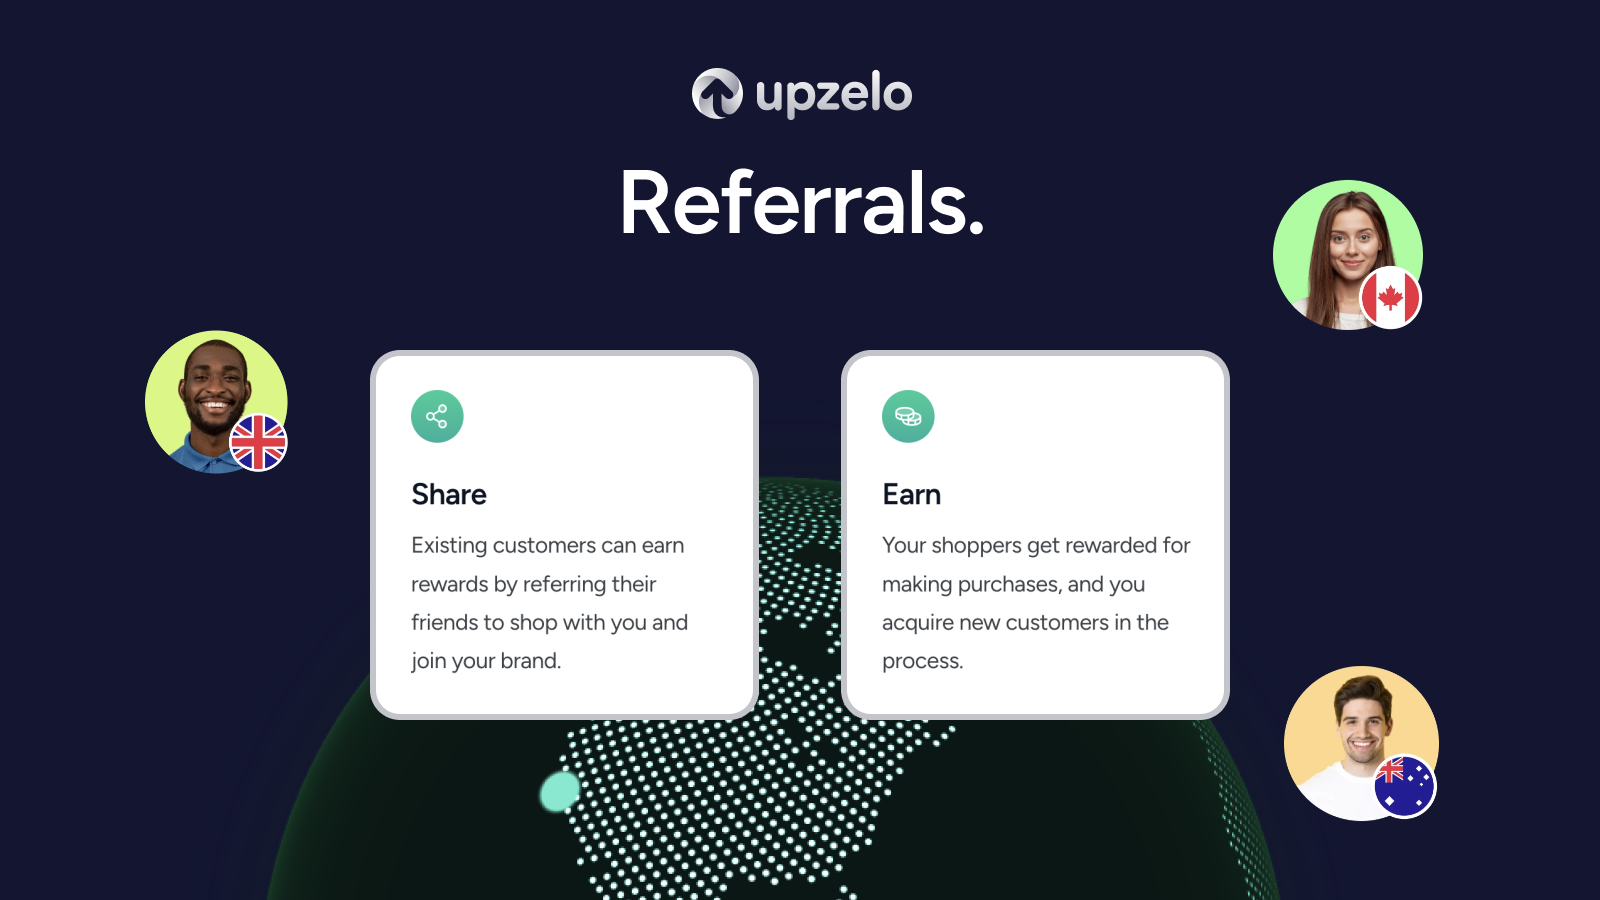 Referrals. Drive growth and engagement in your loyalty program with our referral system.